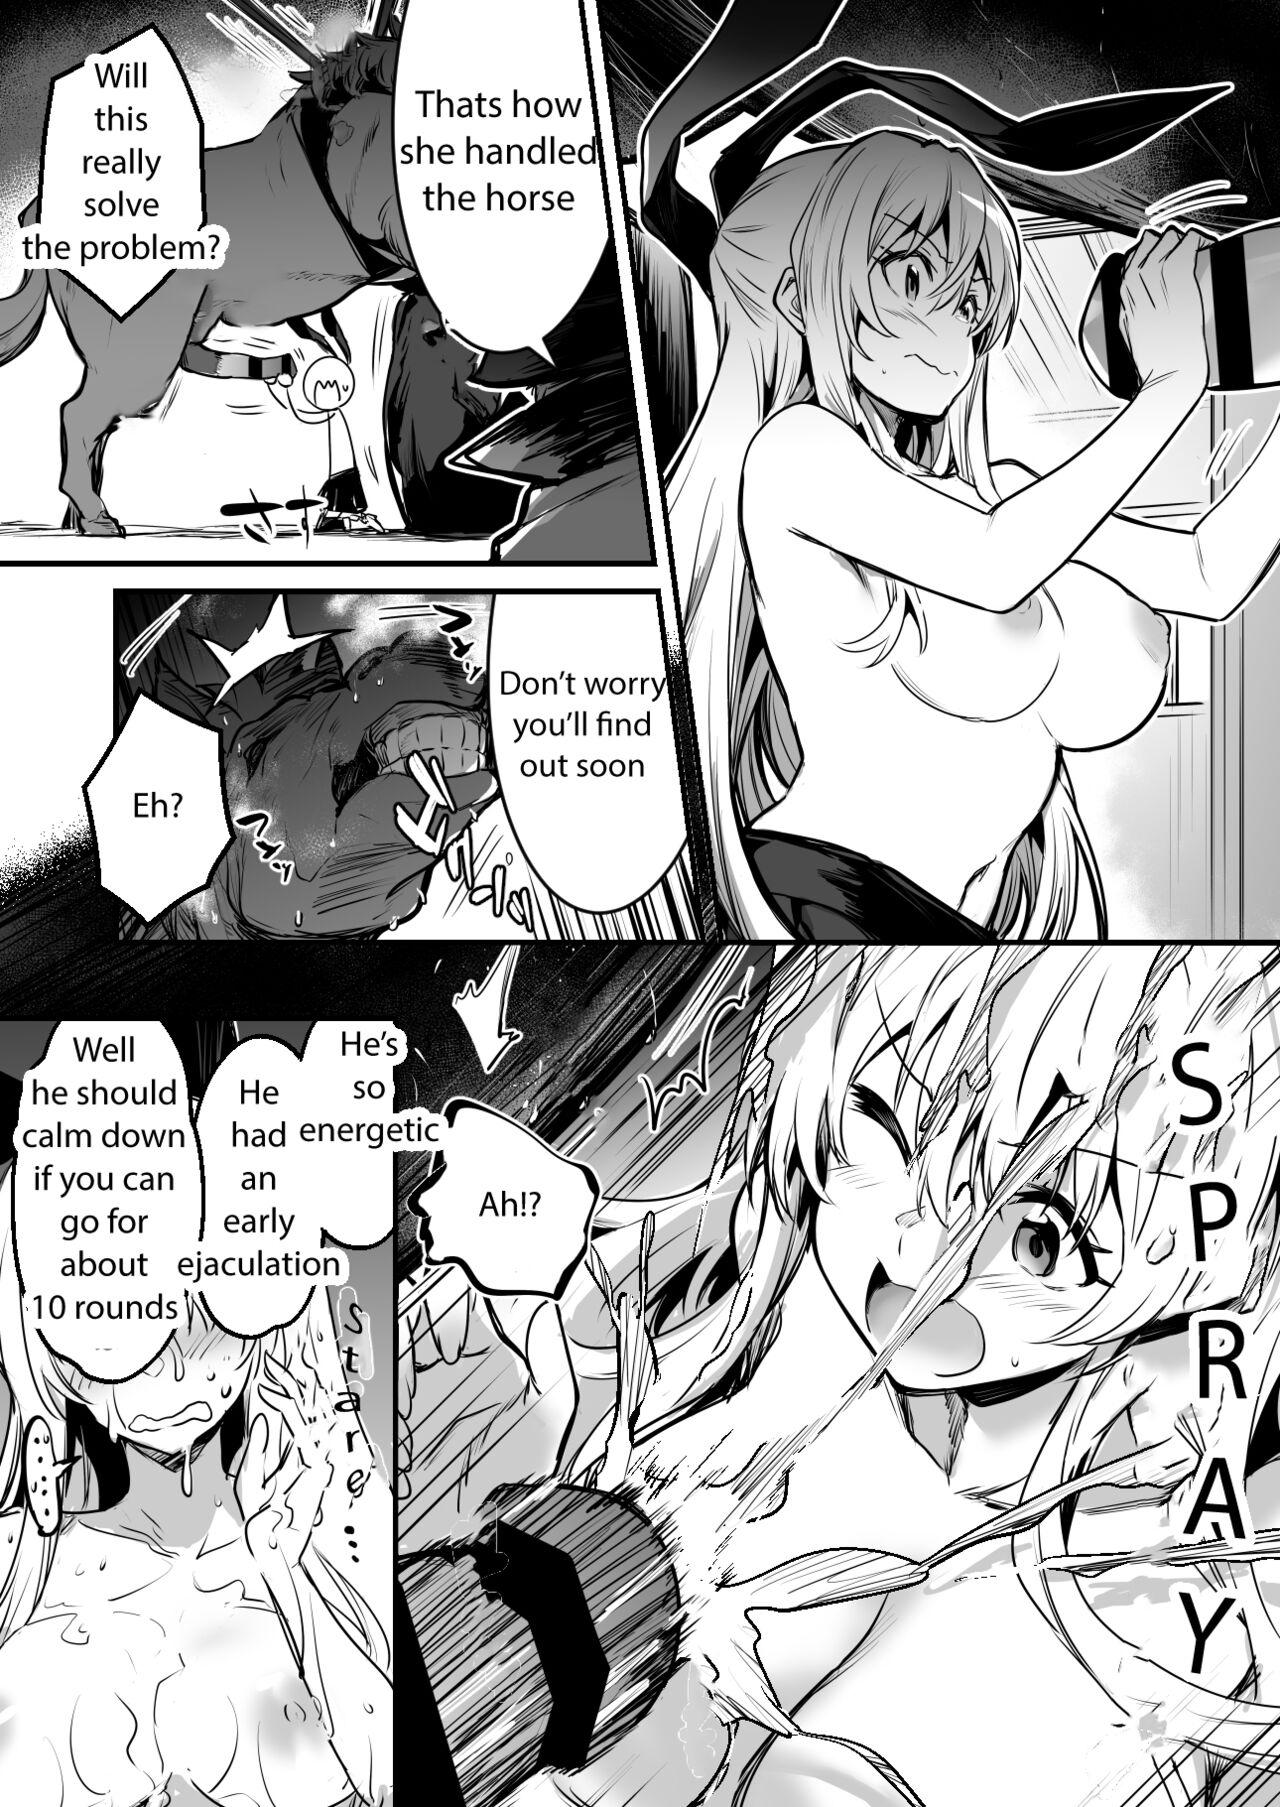 Adventure-chan helps the lustful horse cum so he'll carry her away 3